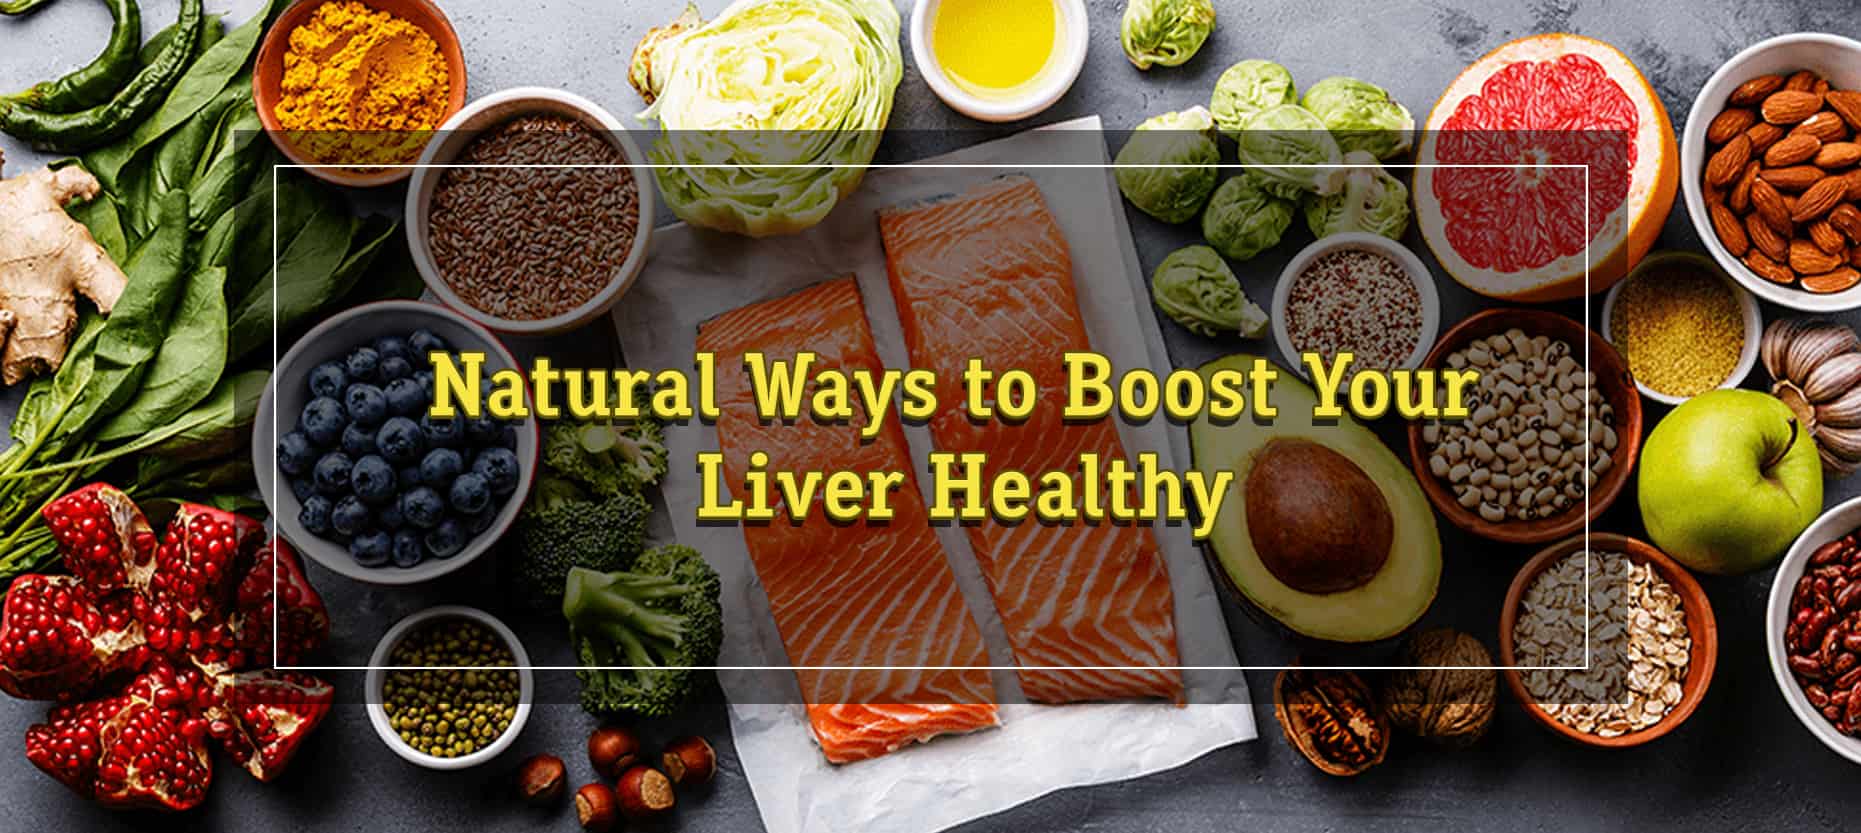 Natural ways to boost your liver health